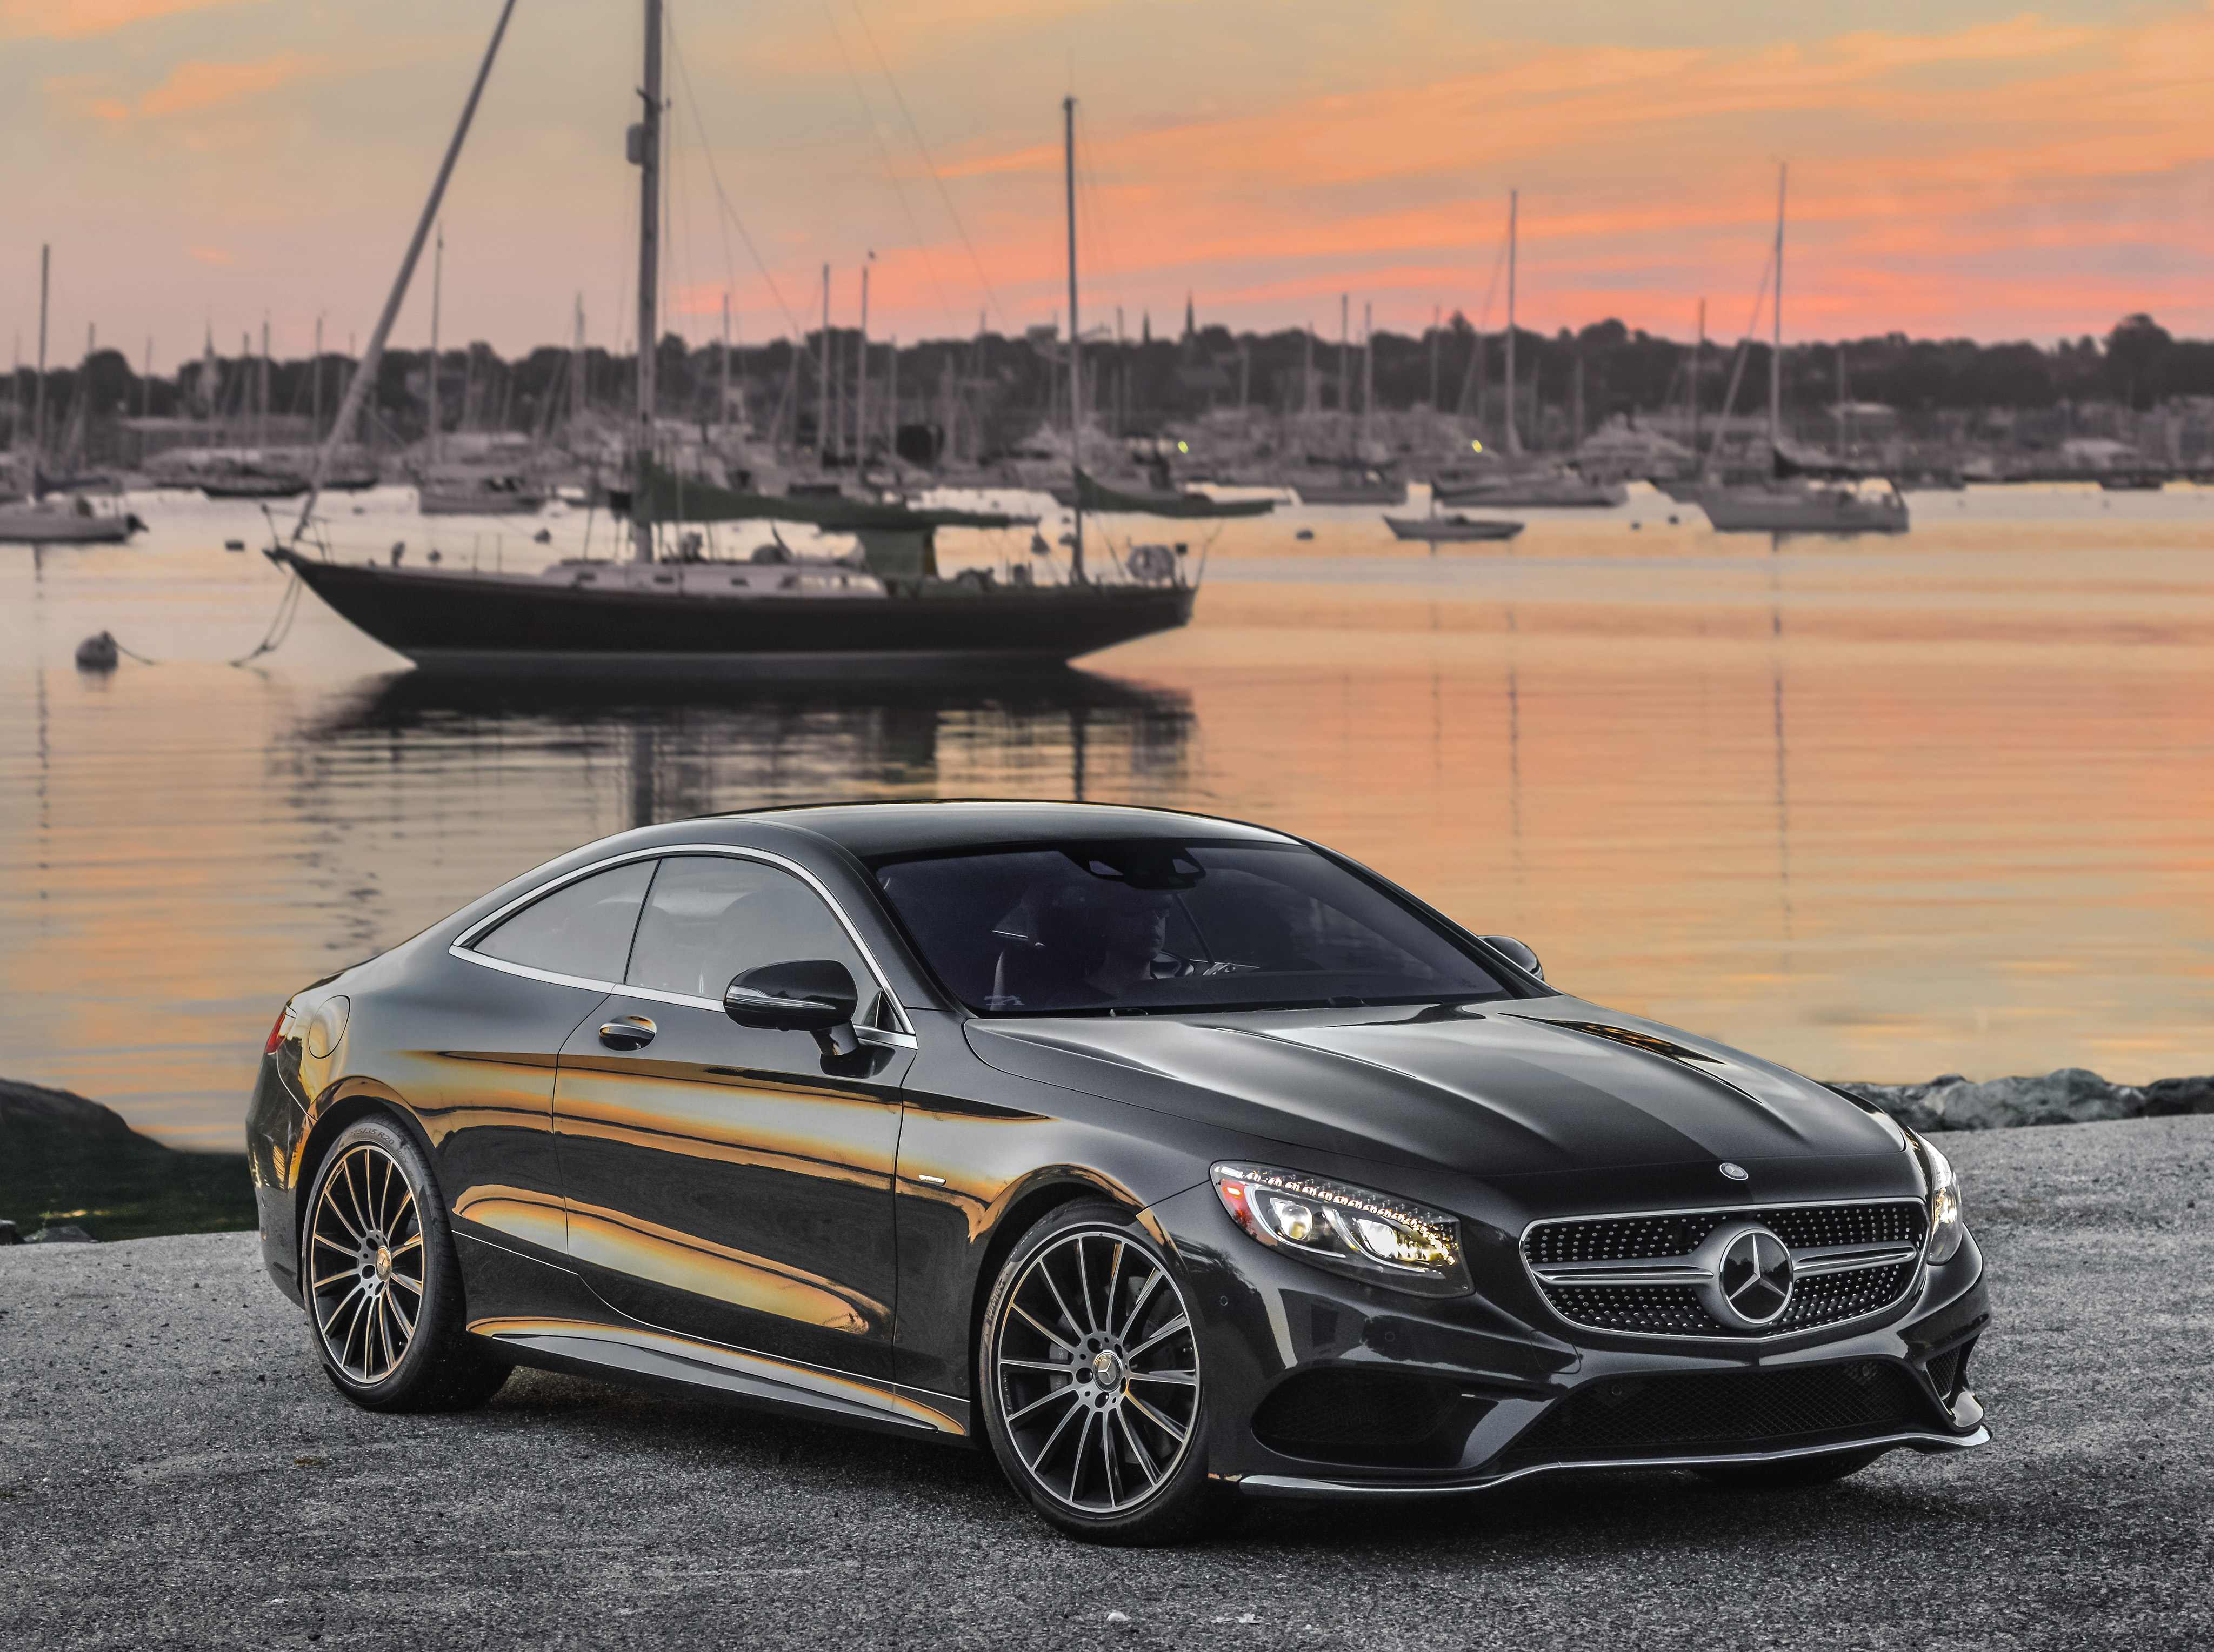 amg, mercedes-benz, cars, s-class, s 550 High Definition image